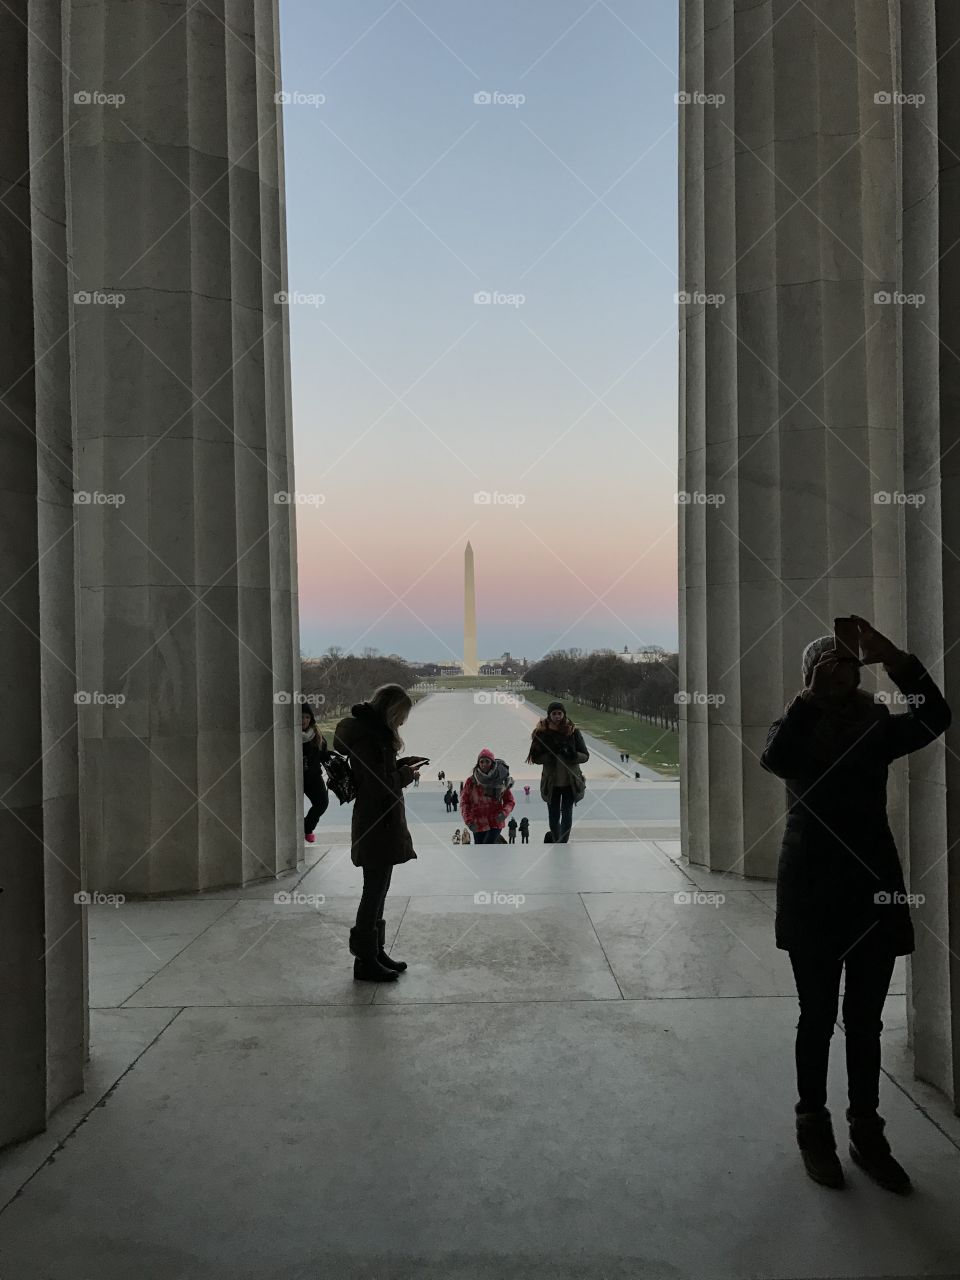 Lincoln's View